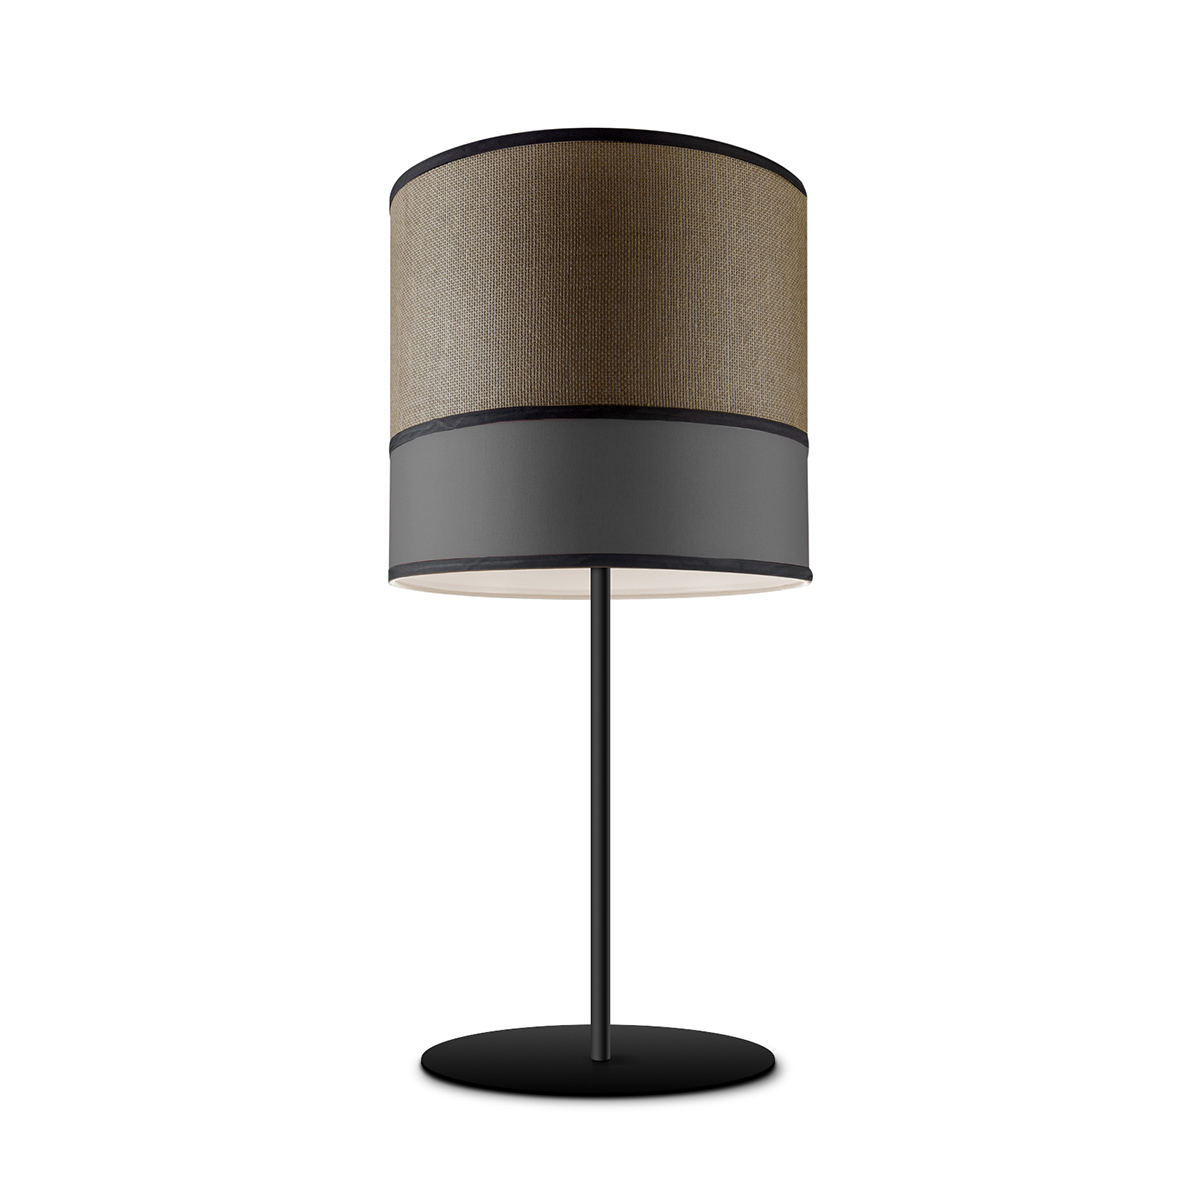 Tangla lighting - TLT7012-25GY - LED table lamp 1 Light - metal and paper and TC fabric in grey - night - E27